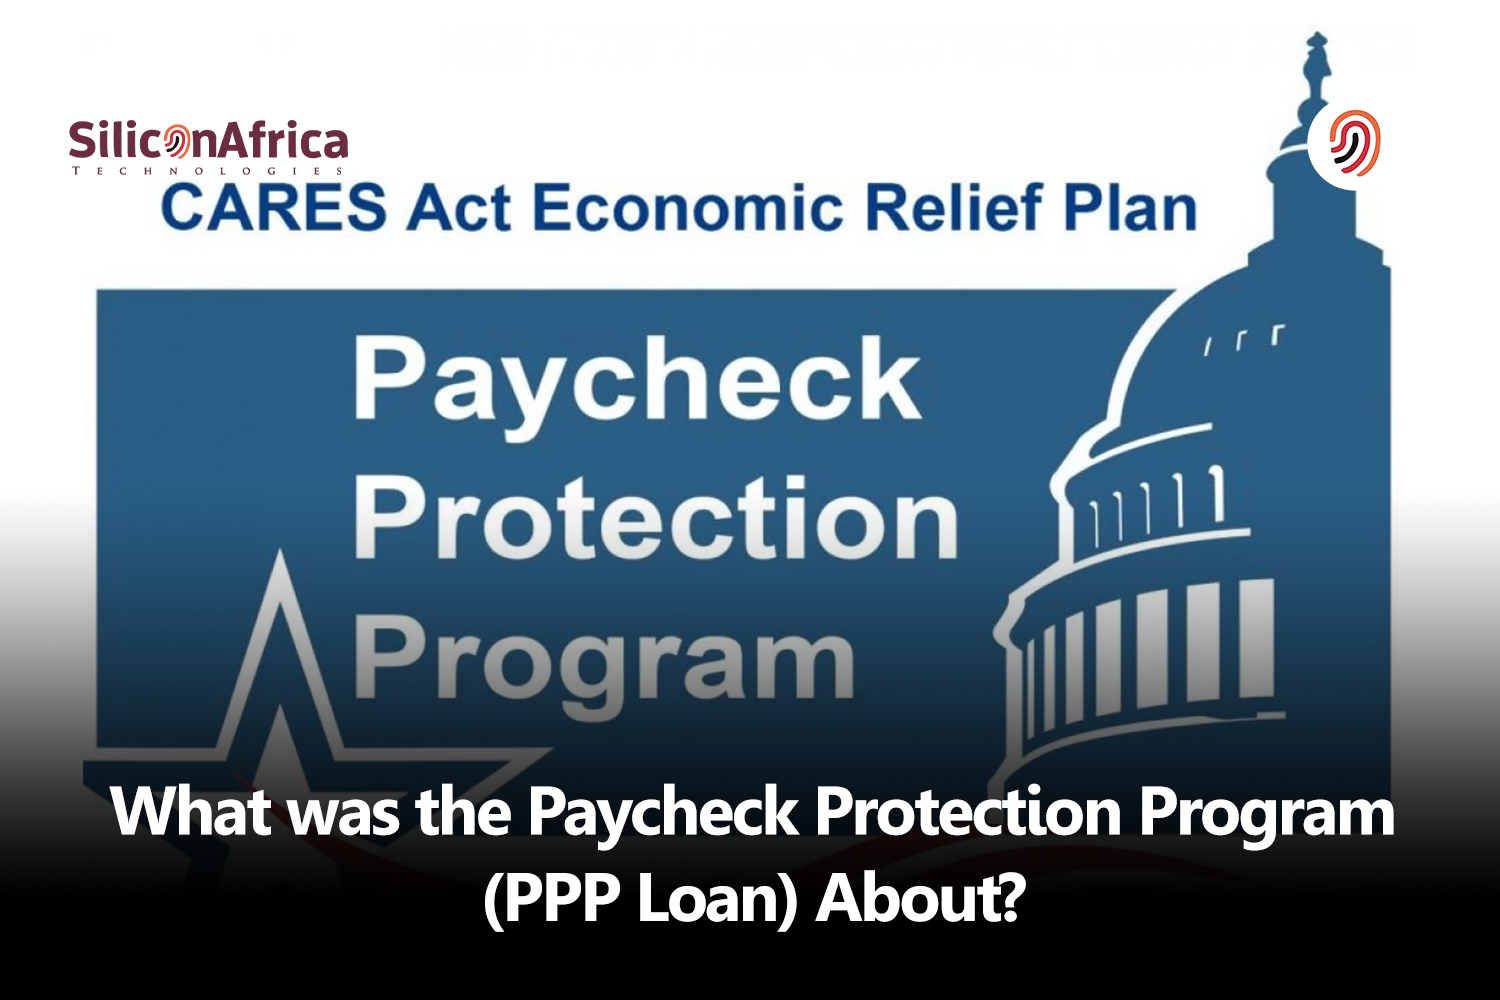 What was the Paycheck Protection Program (PPP Loan) About?